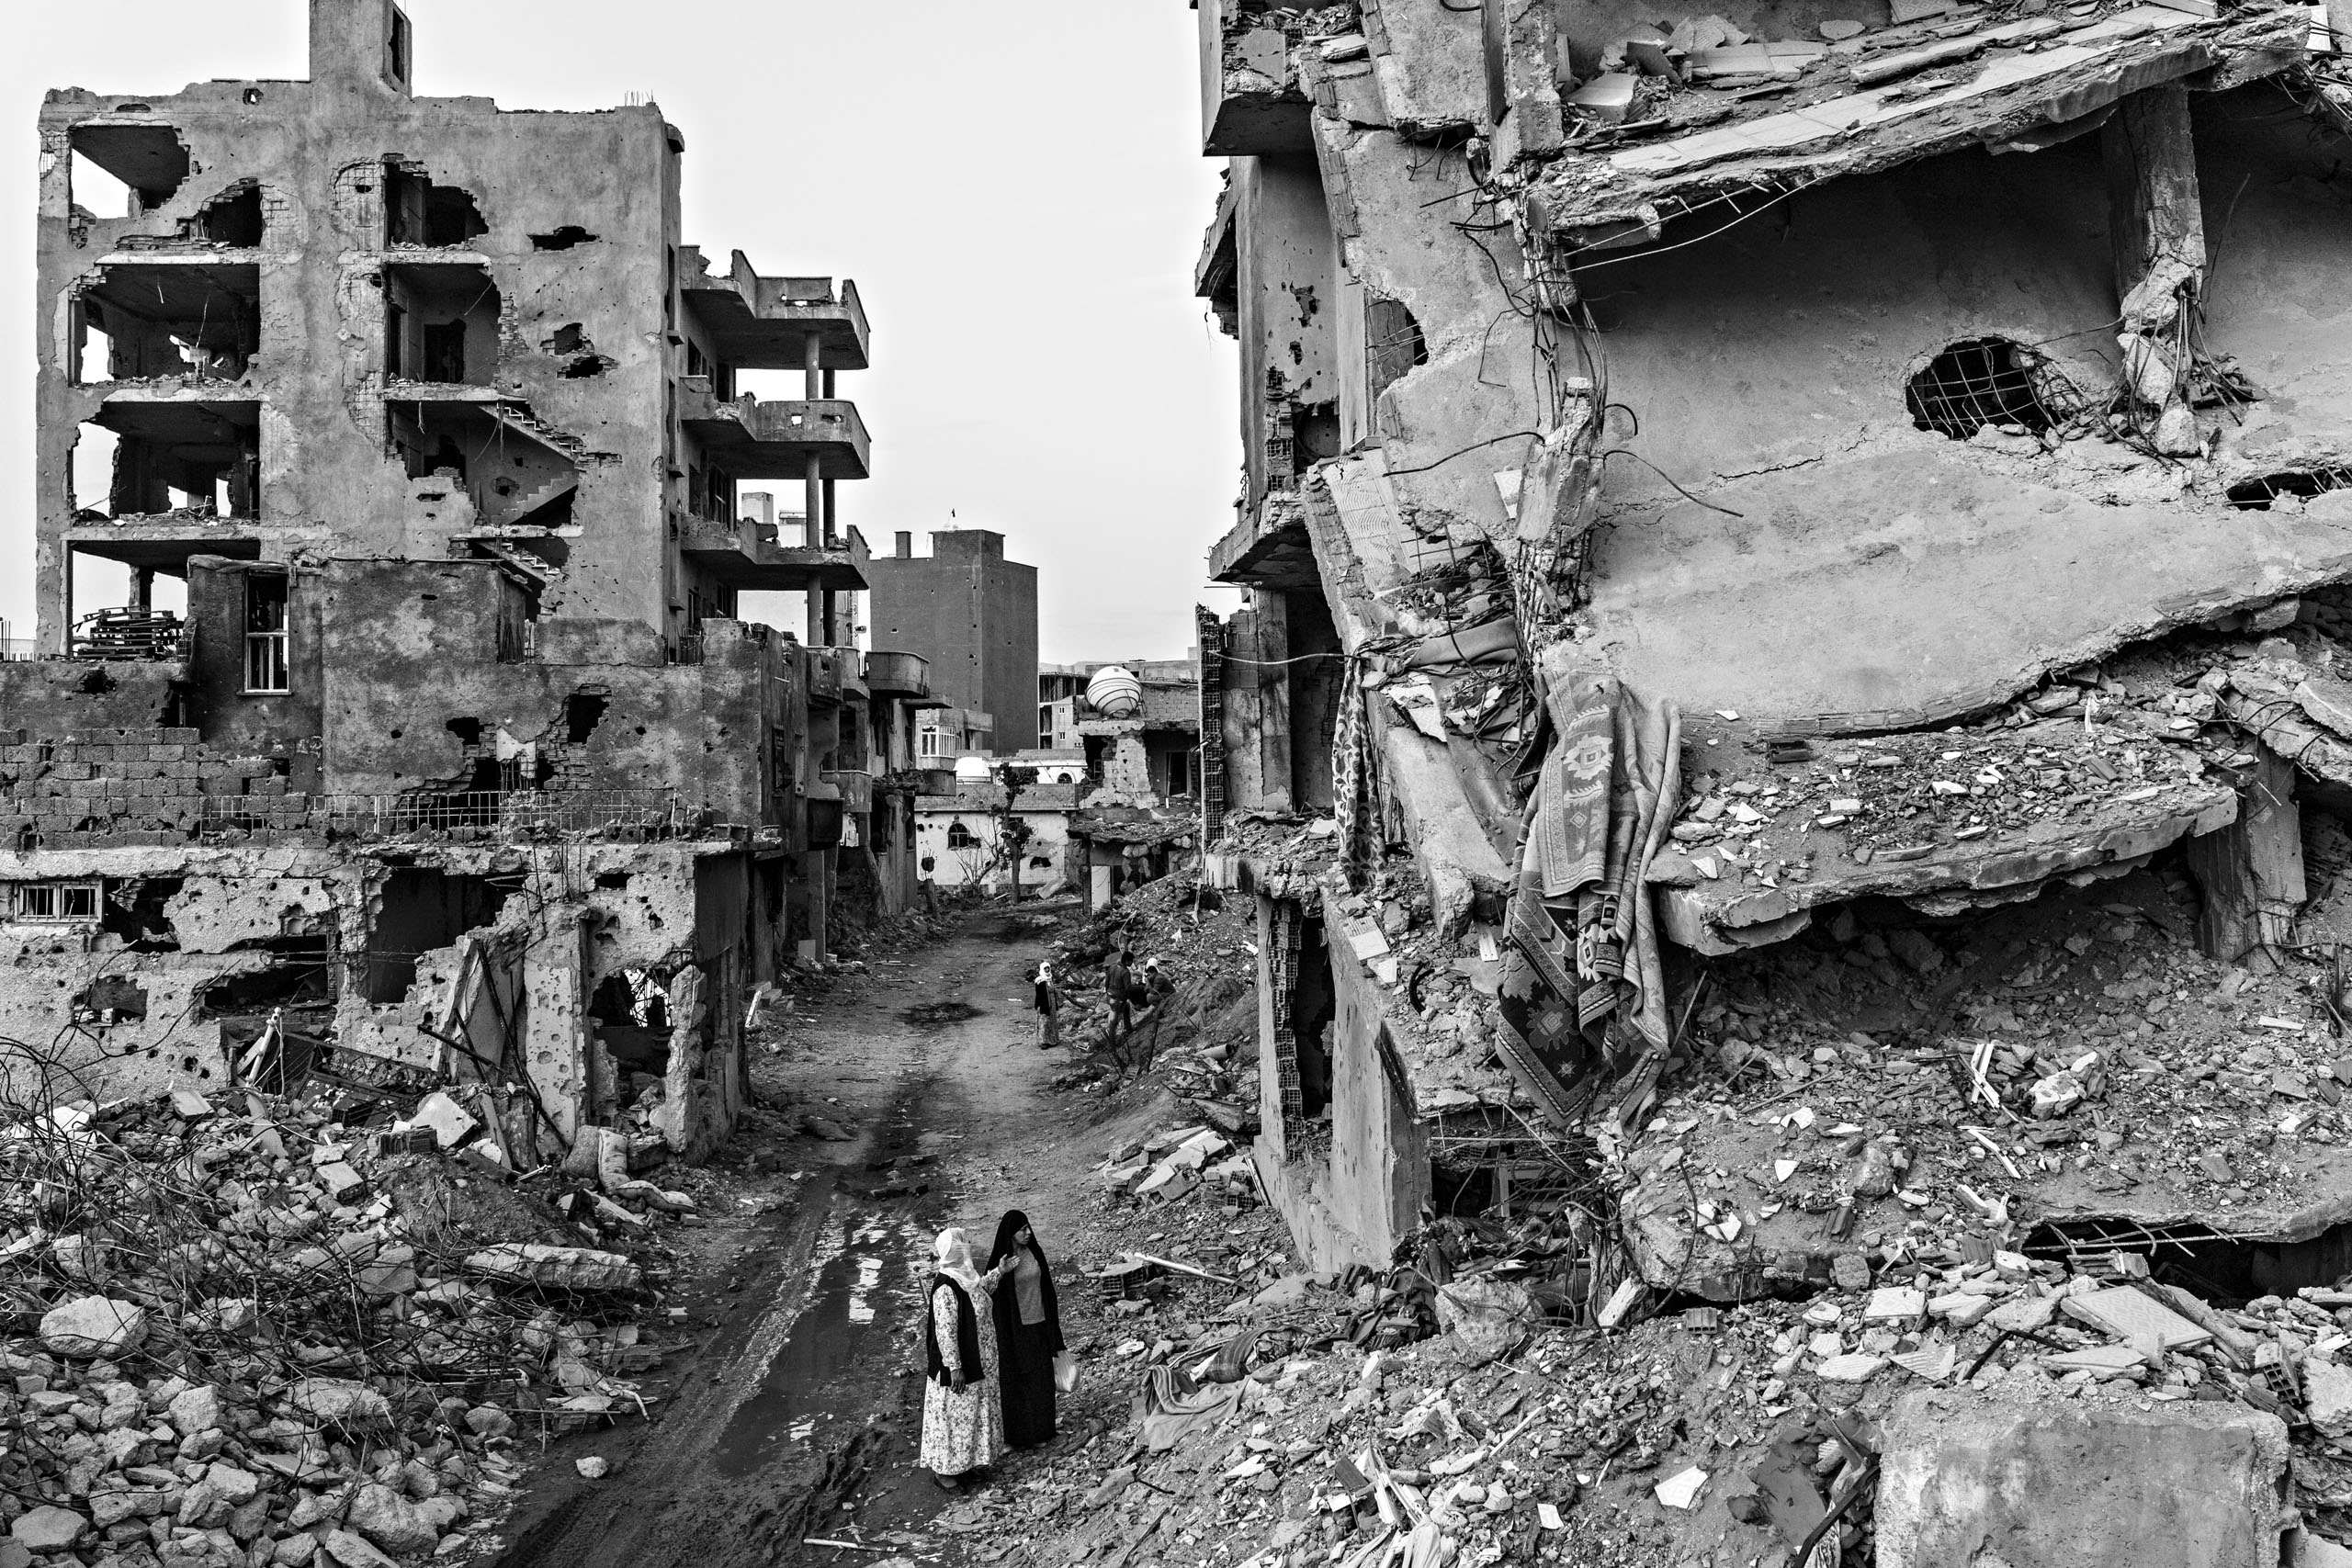 Destruction in Cizre, southeastern Turkey where Turkish special forces have been fighting the Kurdistan Workers Party (PKK). Families returned to their destroyed homes, March 2016.